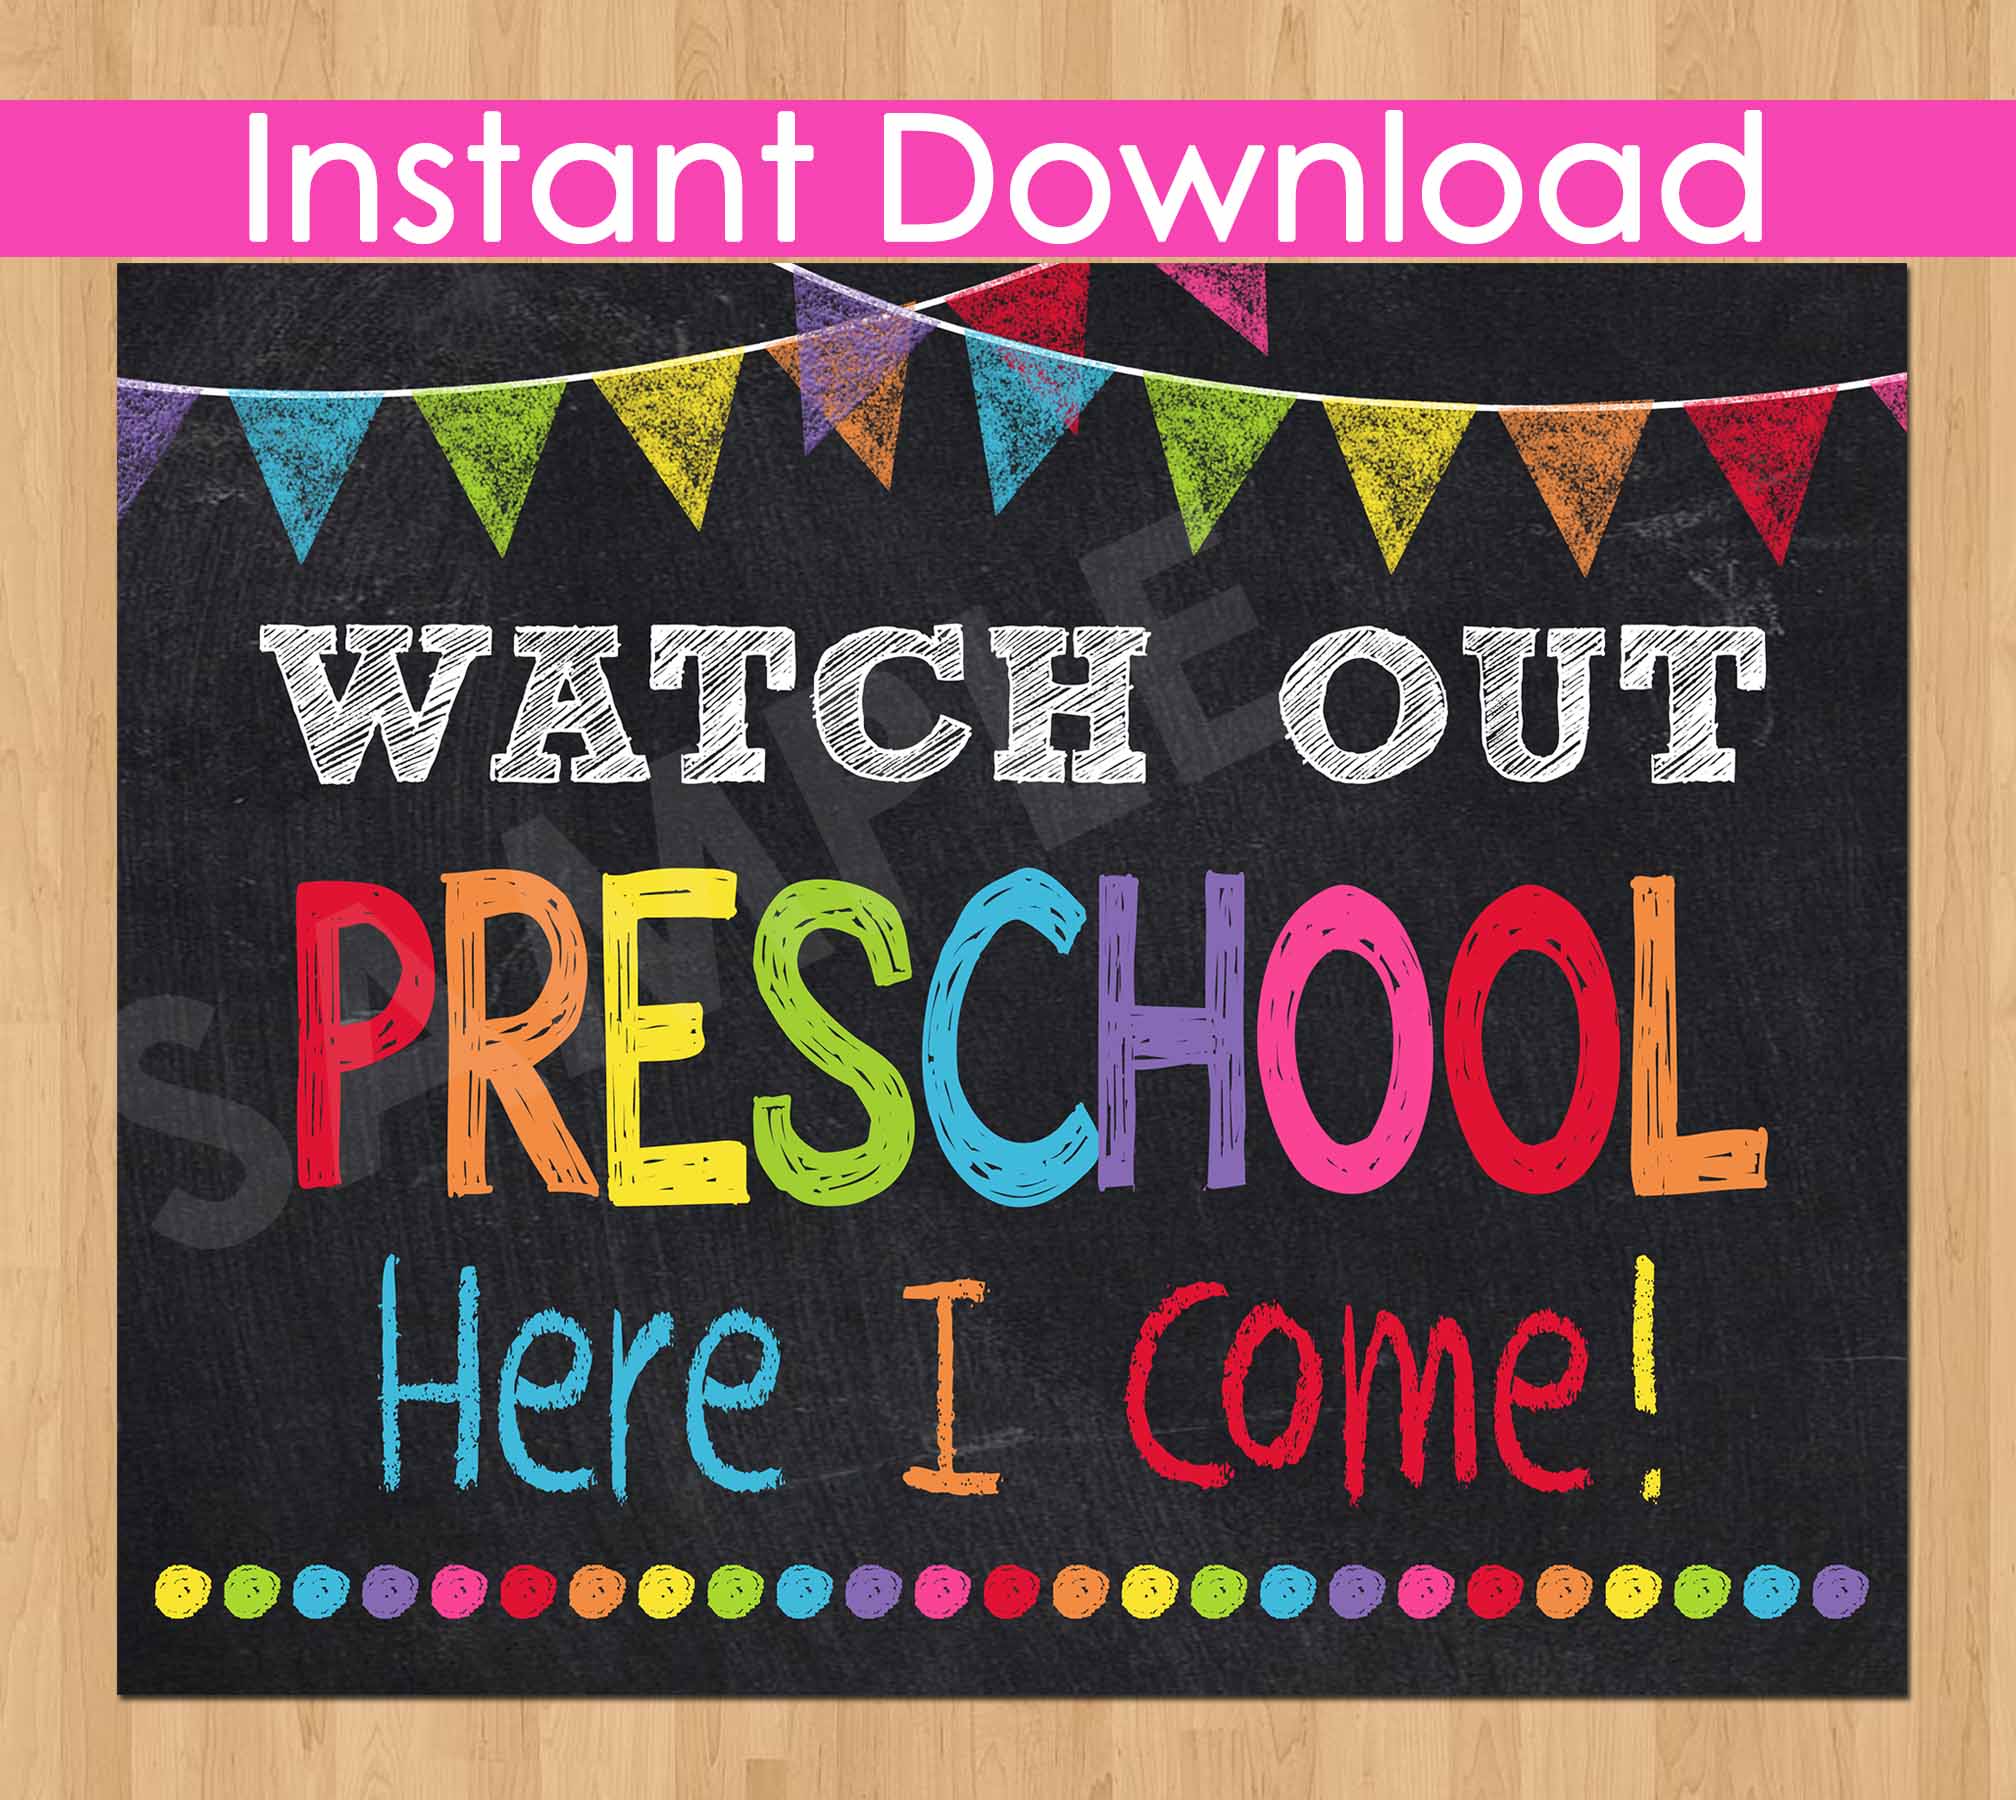 First Day of Preschool Sign INSTANT DOWNLOAD, Watch Out Preschool Here I Come Sign,Back to School Chalkboard Sign Printable Photo Prop Pre-K